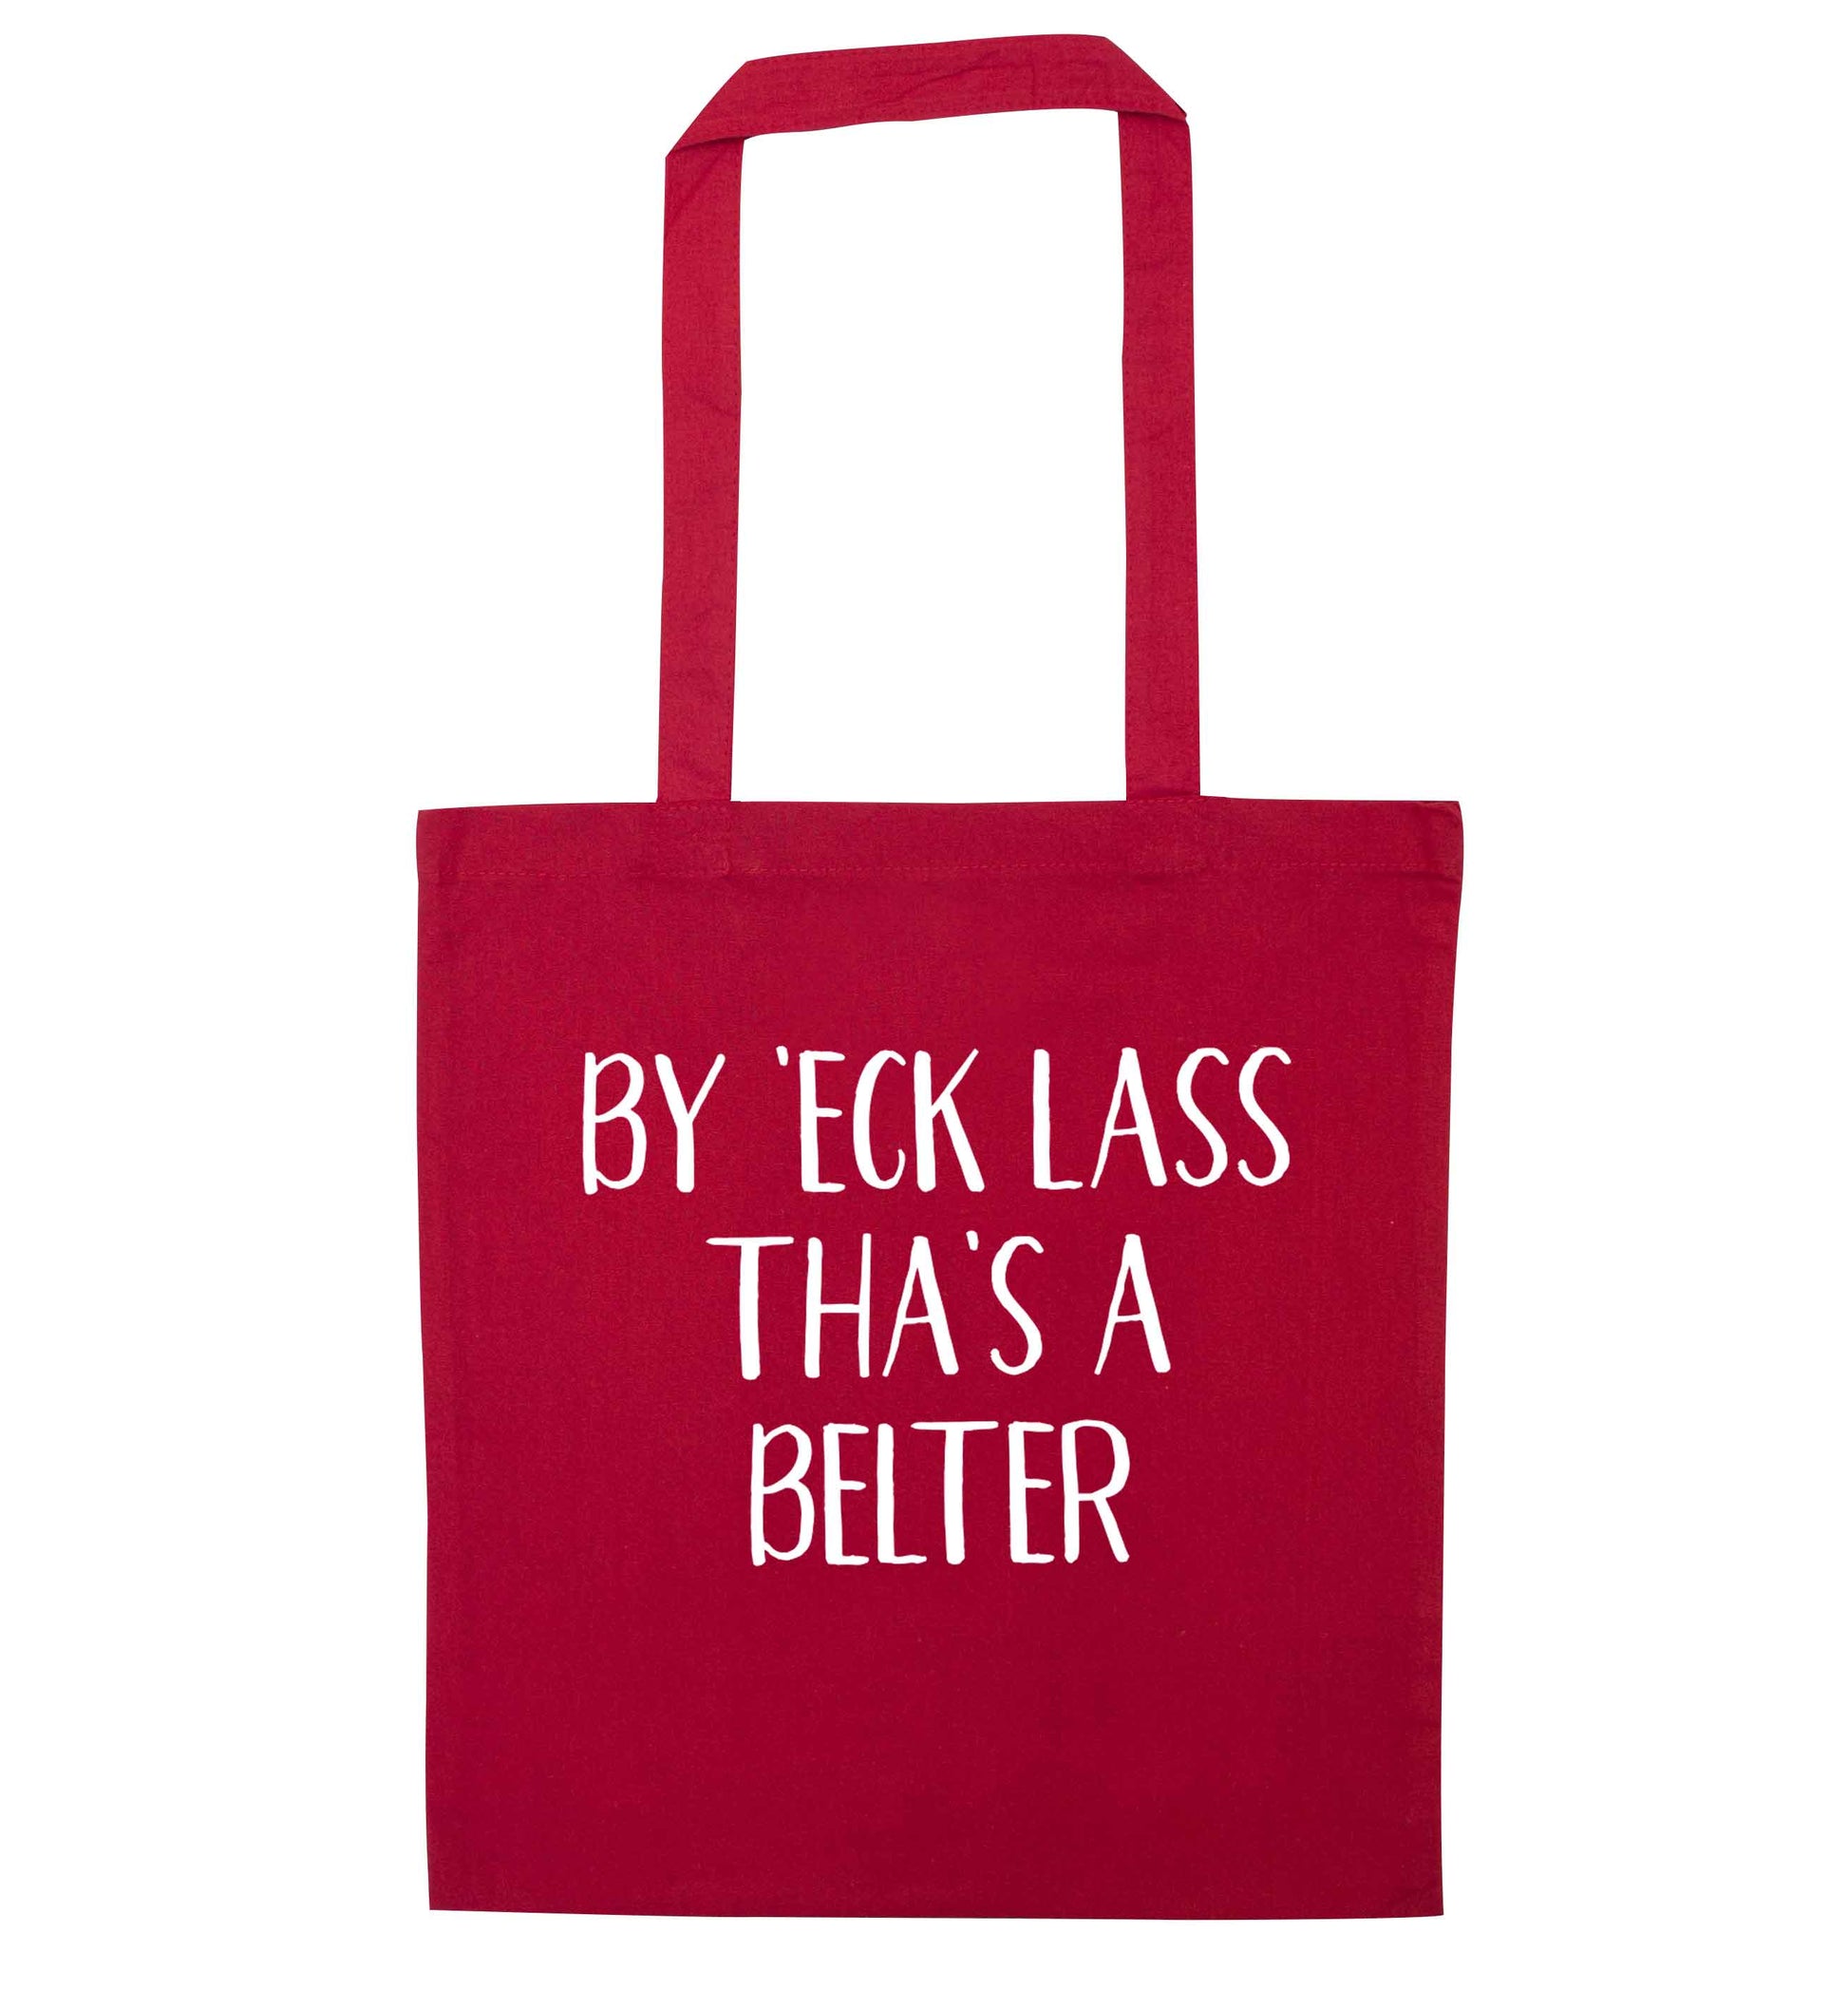 Be 'eck lass tha's a belter red tote bag